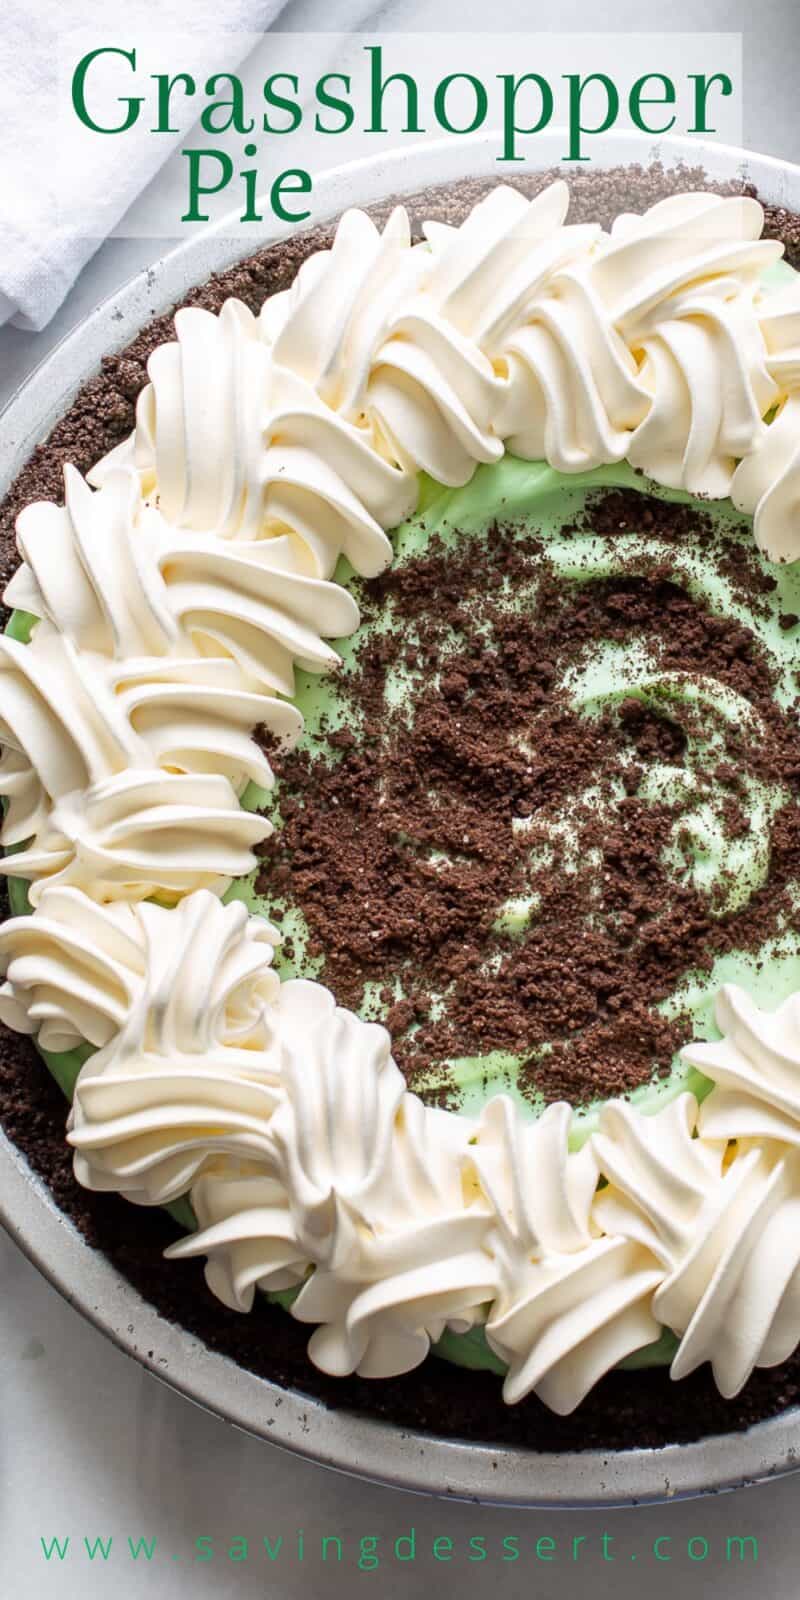 Overhead view of a Grasshopper Pie with a whipped cream border and crumbled Oreos on top